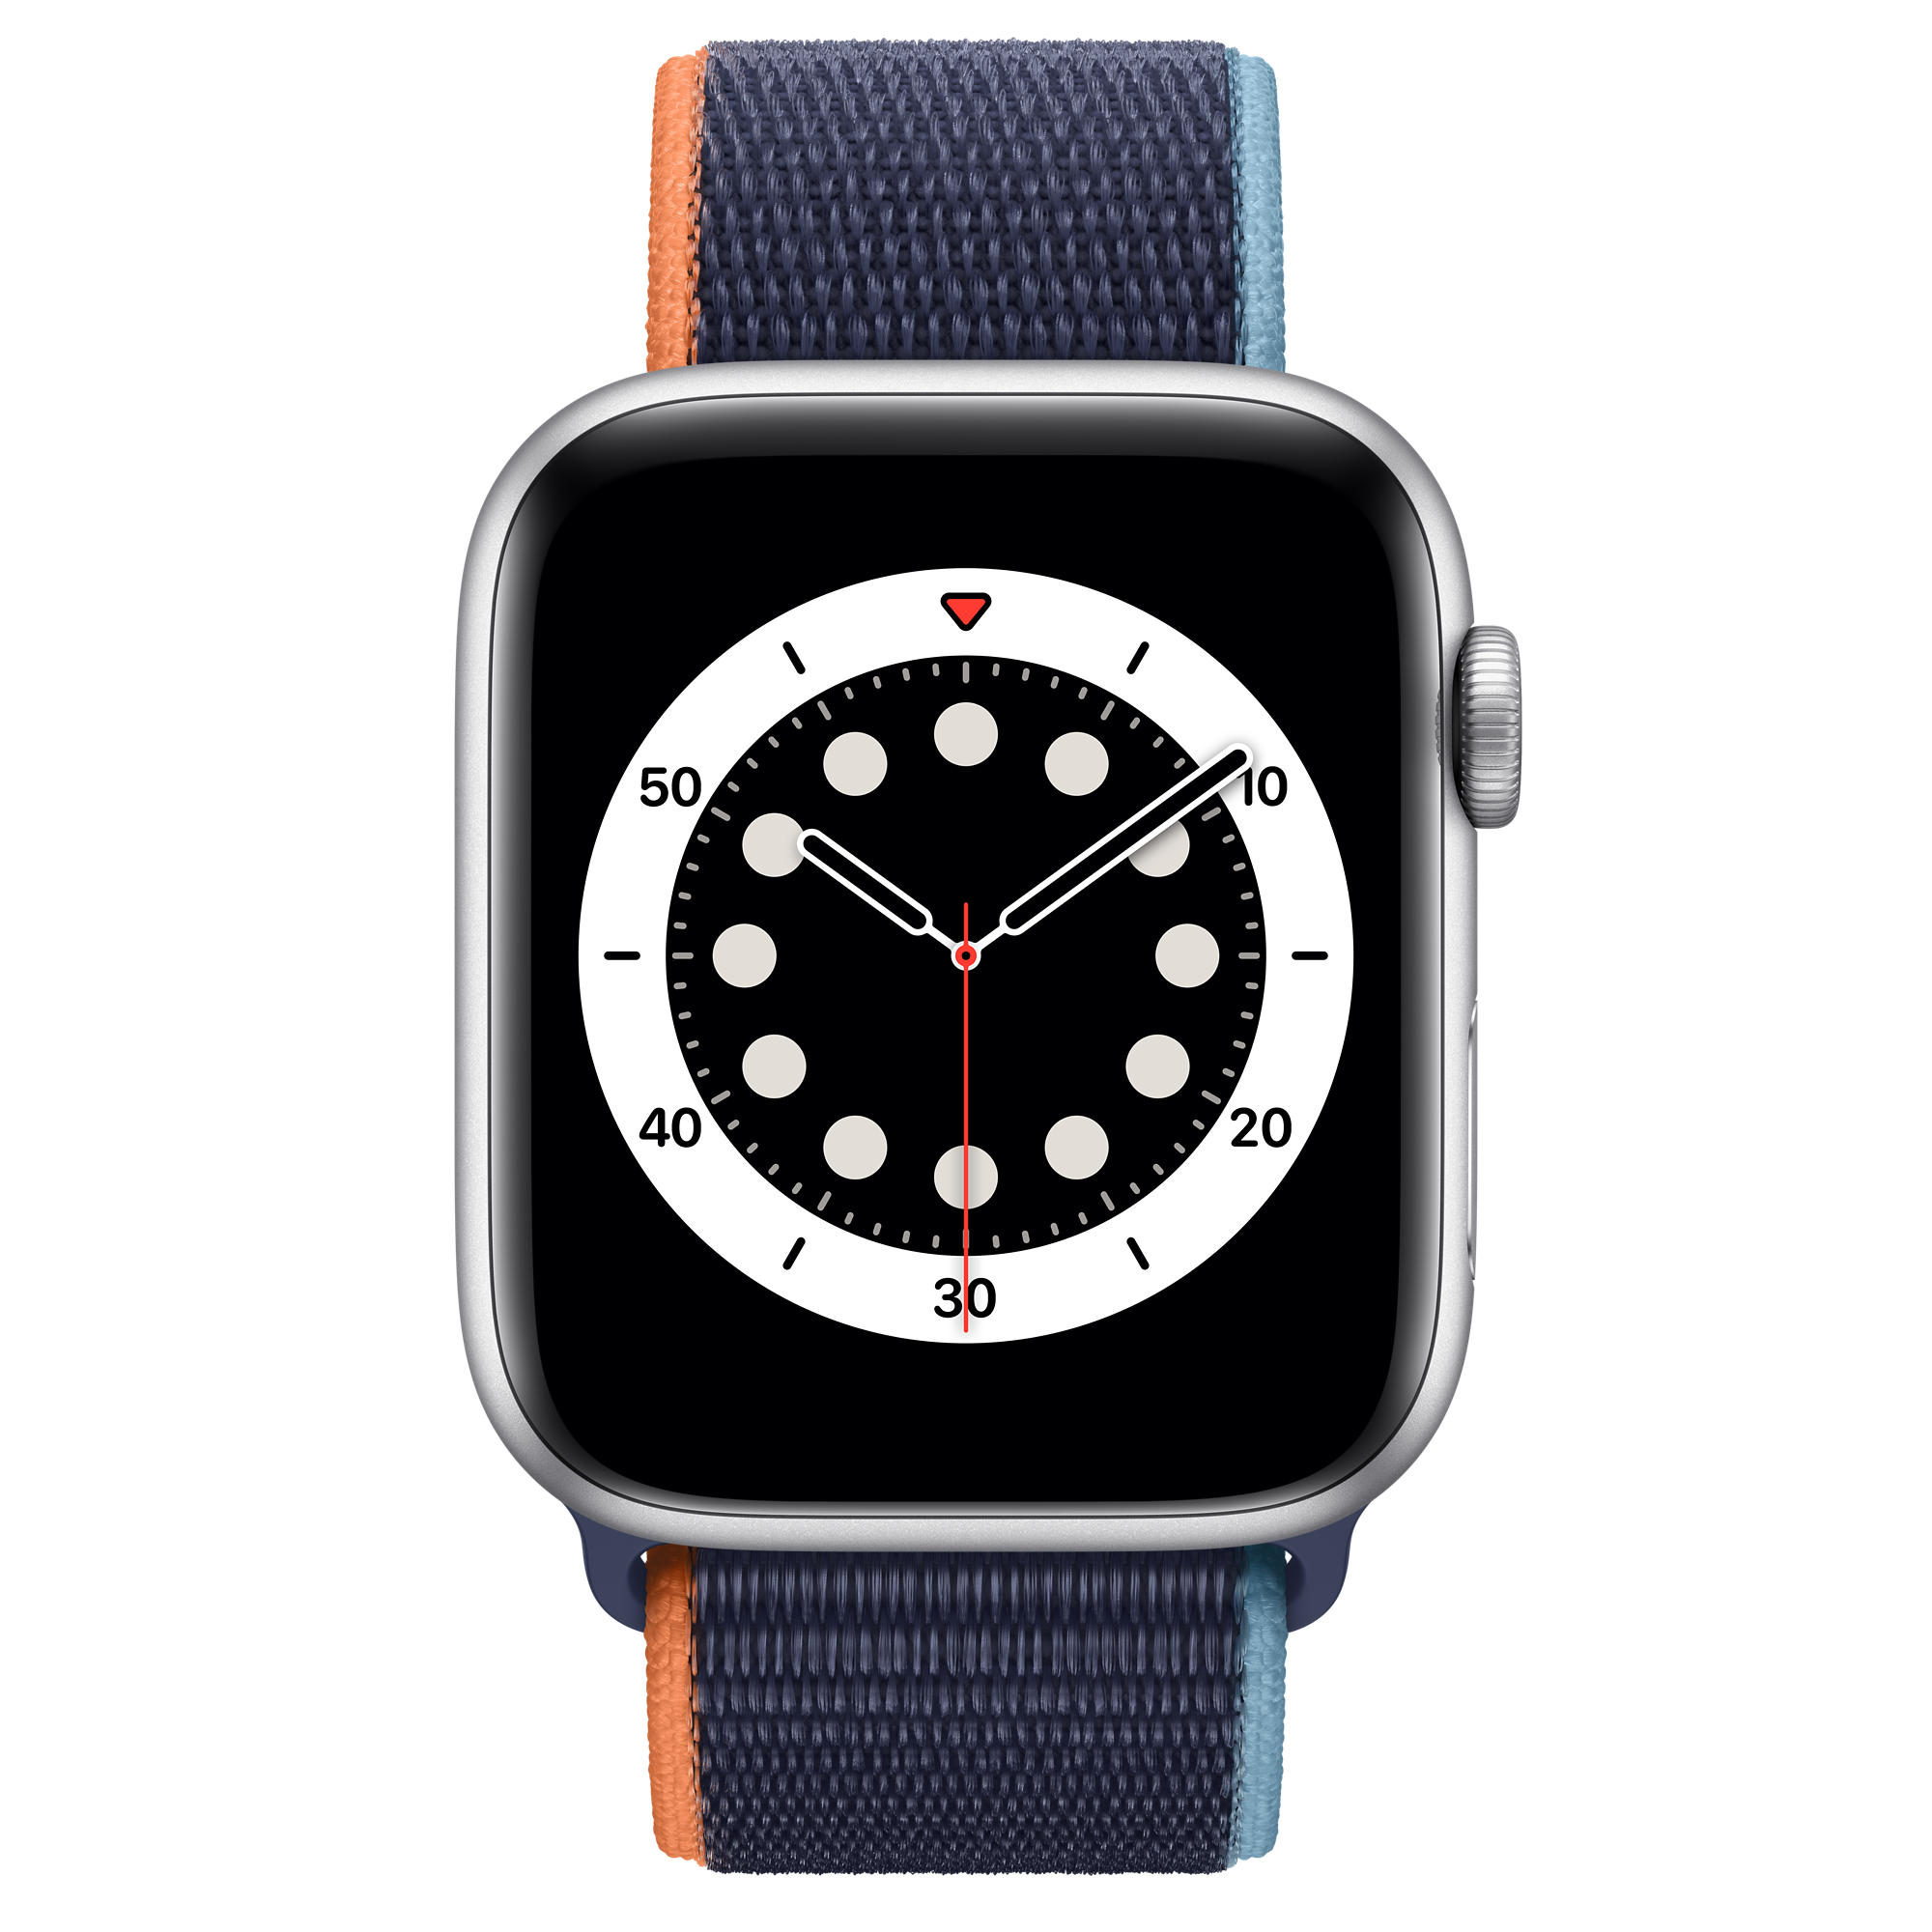 Apple Watch Series 5 PNG-Afbeelding Transparante achtergrond